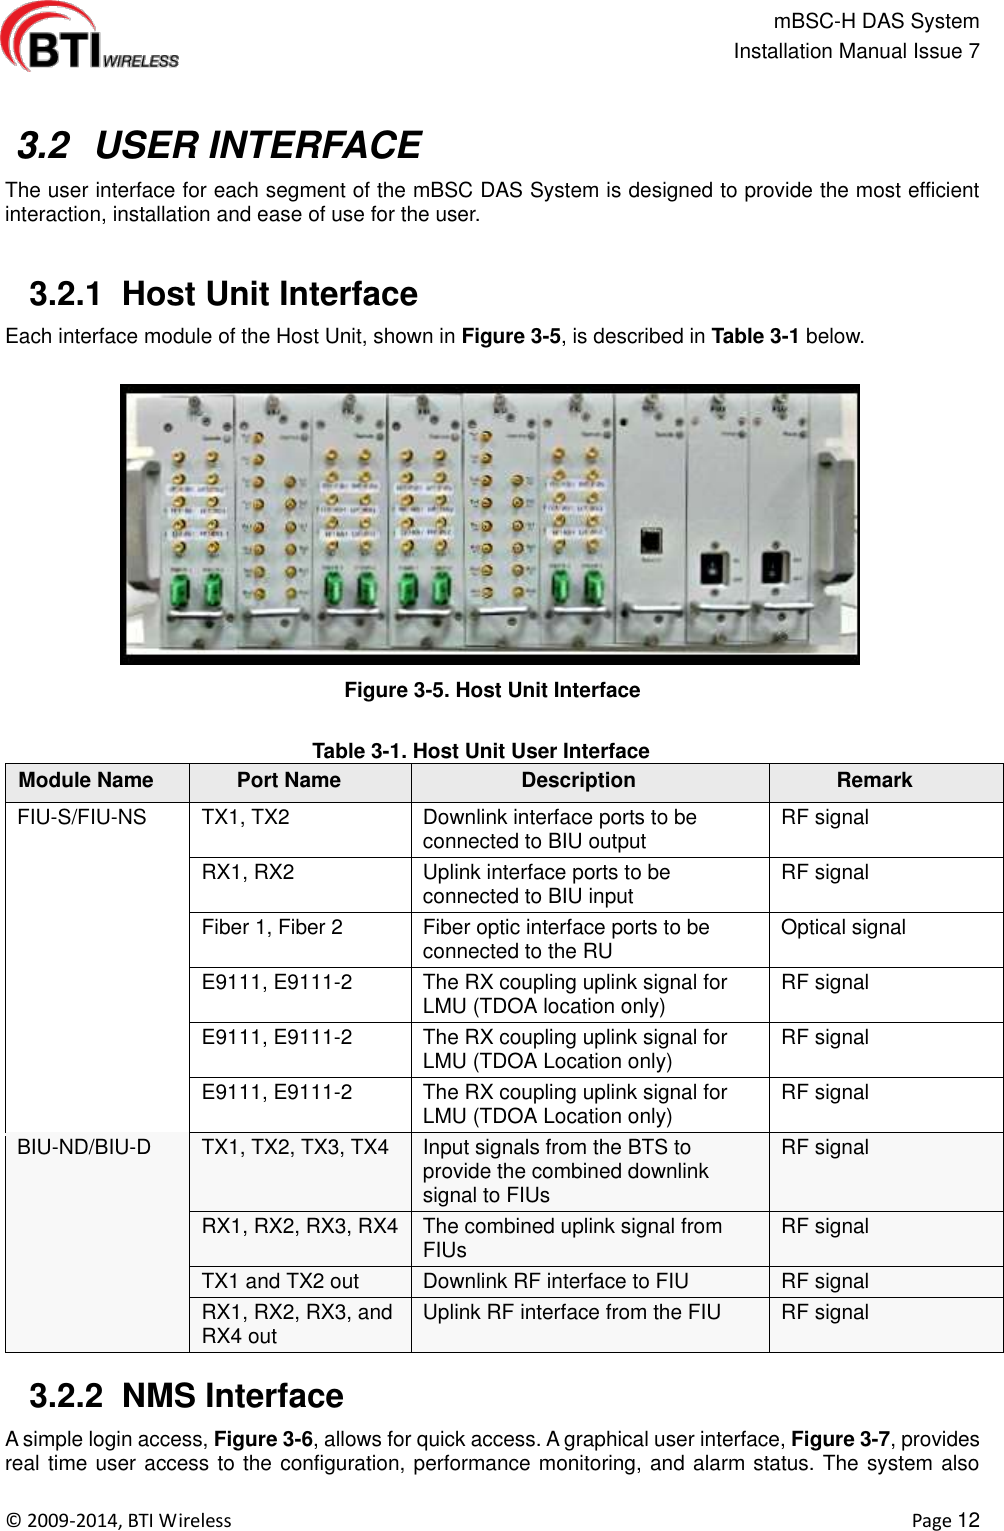                                                   mBSC-H DAS System   Installation Manual Issue 7  ©  2009-2014, BTI Wireless    Page 12    3.2  USER INTERFACE The user interface for each segment of the mBSC DAS System is designed to provide the most efficient interaction, installation and ease of use for the user.    3.2.1  Host Unit Interface Each interface module of the Host Unit, shown in Figure 3-5, is described in Table 3-1 below.  Figure 3-5. Host Unit Interface  Table 3-1. Host Unit User Interface Module Name Port Name Description Remark FIU-S/FIU-NS TX1, TX2 Downlink interface ports to be connected to BIU output RF signal RX1, RX2 Uplink interface ports to be connected to BIU input RF signal Fiber 1, Fiber 2 Fiber optic interface ports to be connected to the RU Optical signal E9111, E9111-2 The RX coupling uplink signal for LMU (TDOA location only) RF signal E9111, E9111-2 The RX coupling uplink signal for LMU (TDOA Location only) RF signal   E9111, E9111-2 The RX coupling uplink signal for LMU (TDOA Location only) RF signal   BIU-ND/BIU-D TX1, TX2, TX3, TX4 Input signals from the BTS to provide the combined downlink signal to FIUs RF signal   RX1, RX2, RX3, RX4 The combined uplink signal from FIUs   RF signal   TX1 and TX2 out Downlink RF interface to FIU RF signal   RX1, RX2, RX3, and RX4 out Uplink RF interface from the FIU RF signal     3.2.2  NMS Interface A simple login access, Figure 3-6, allows for quick access. A graphical user interface, Figure 3-7, provides real time user access to the configuration, performance monitoring, and alarm status. The system also 